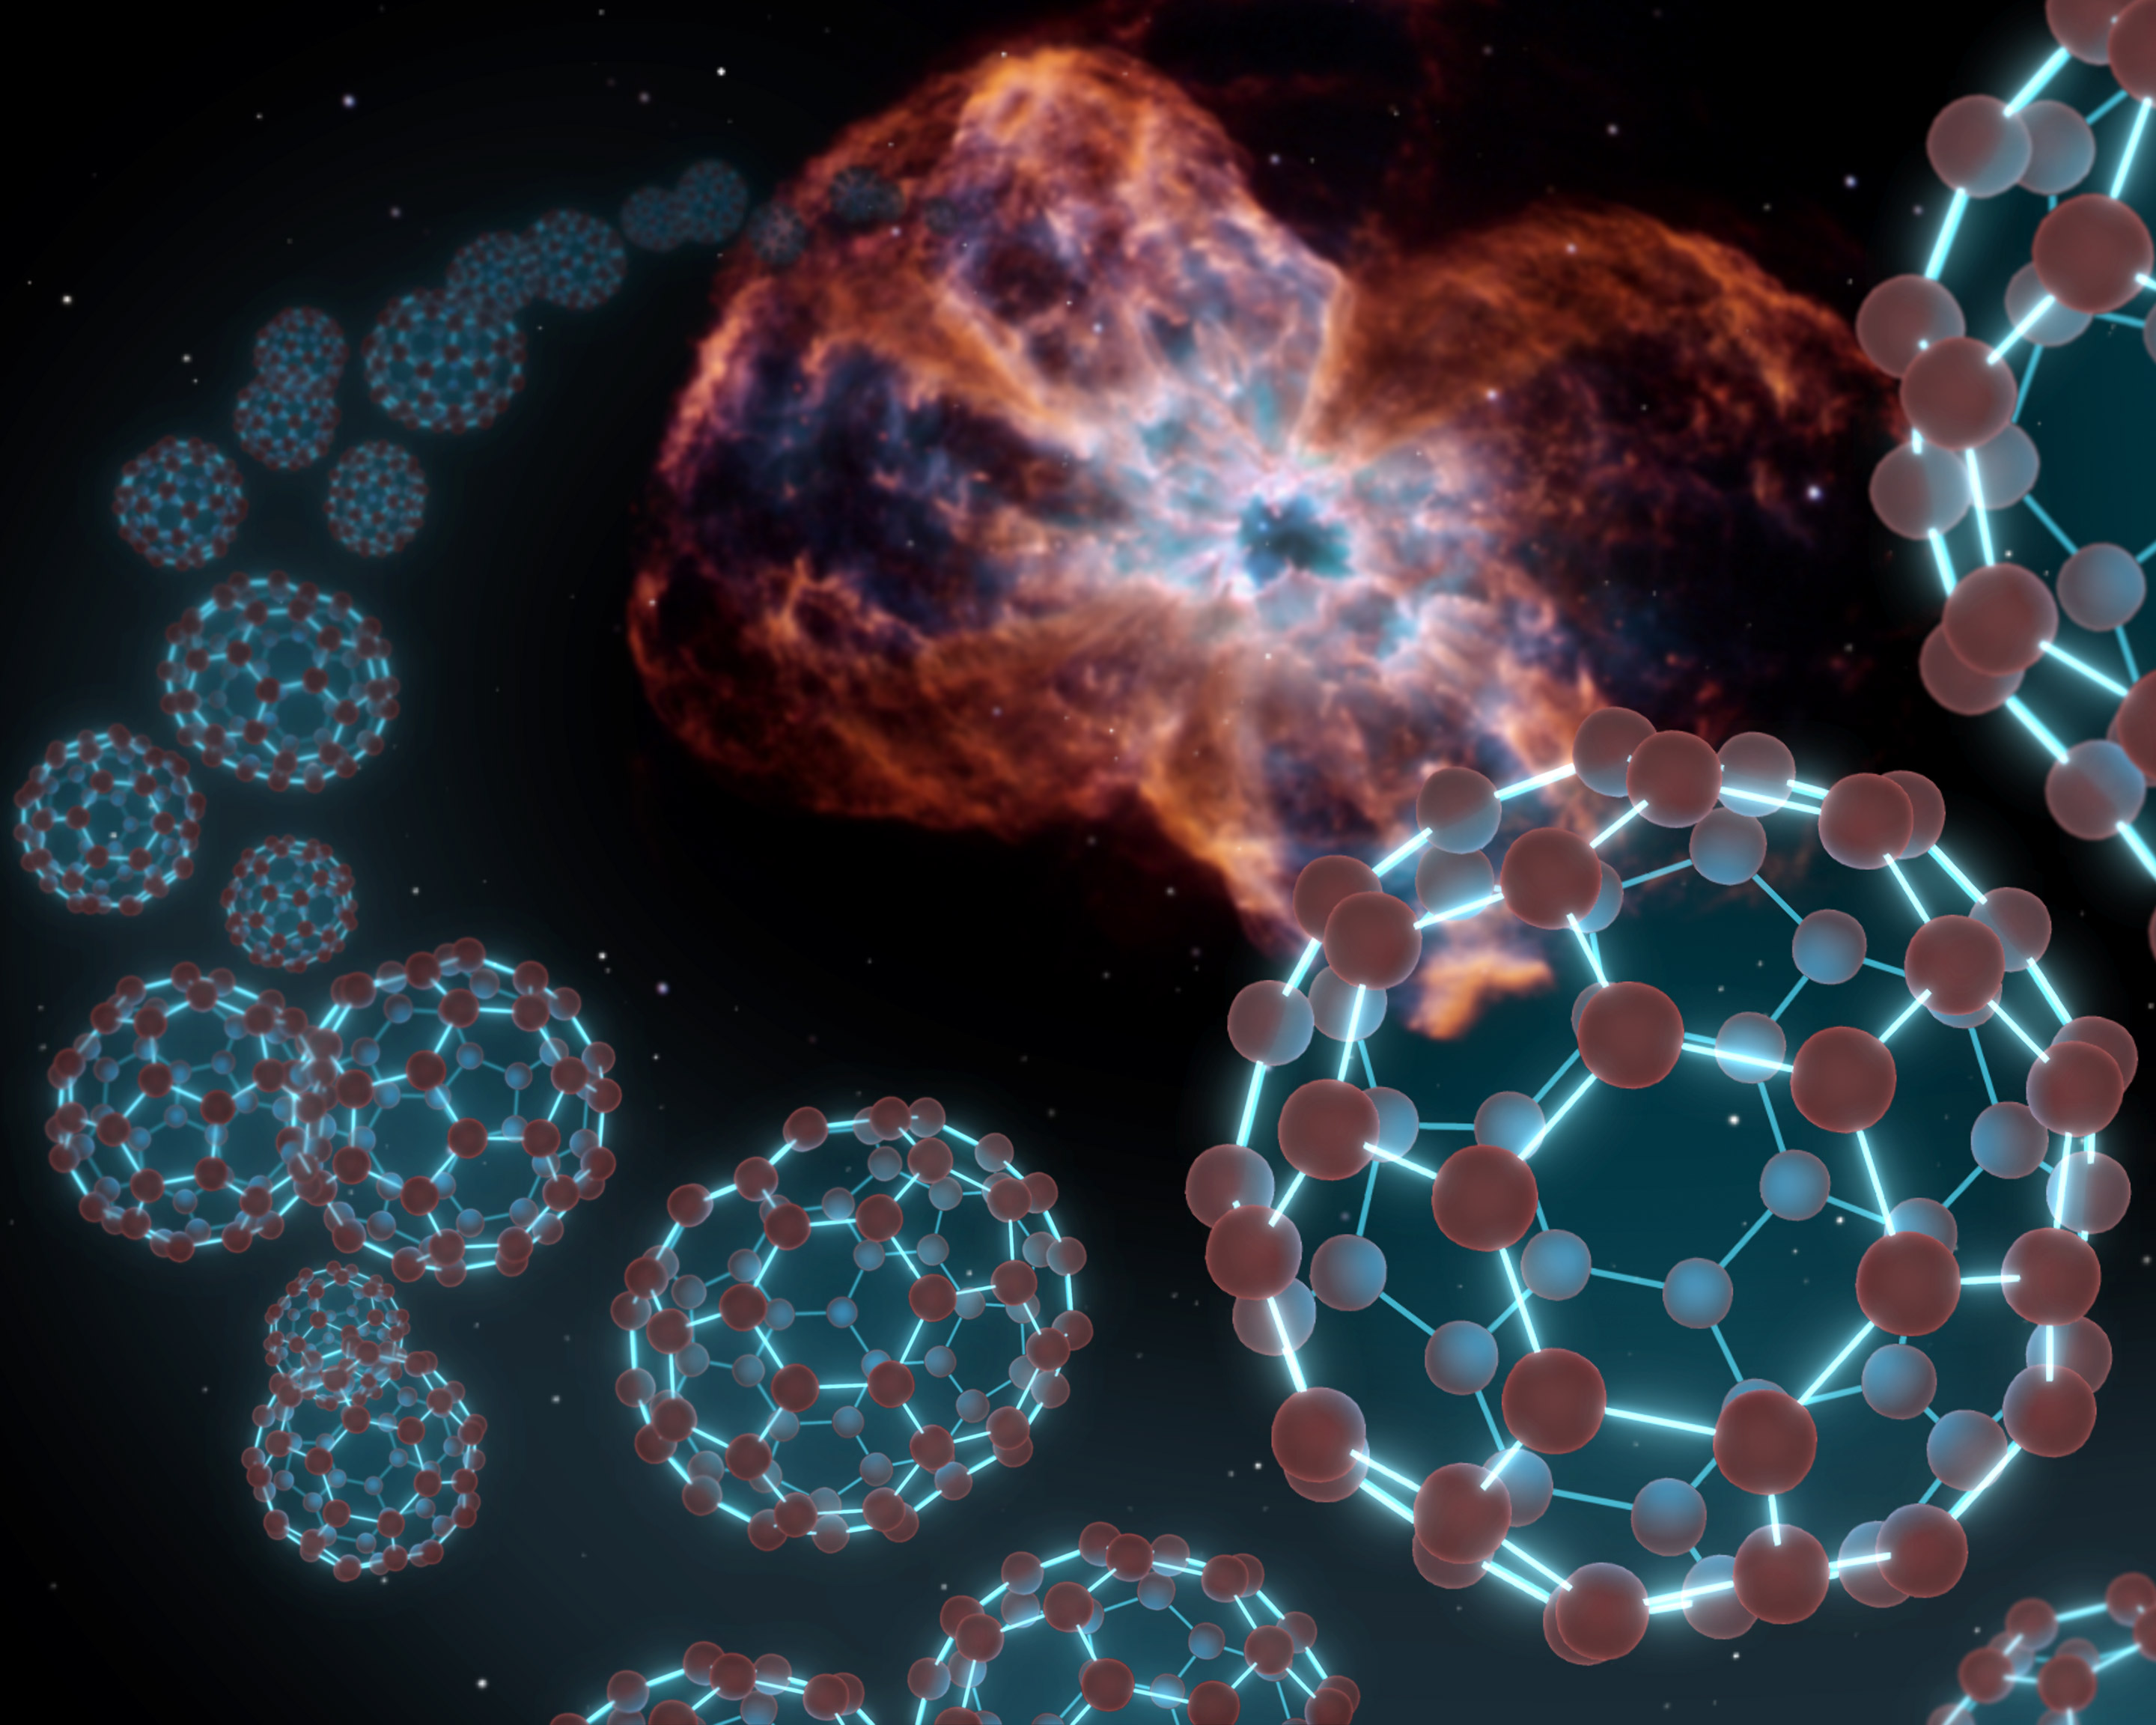 Spitzer has found buckyballs in space, as illustrated by this artist’s conception showing the carbon balls coming out from the type of object where they were discovered - a dying star and the material it sheds, known as a planetary nebula. Image: NASA/JPL-Caltech/T. Pyle (SSC)